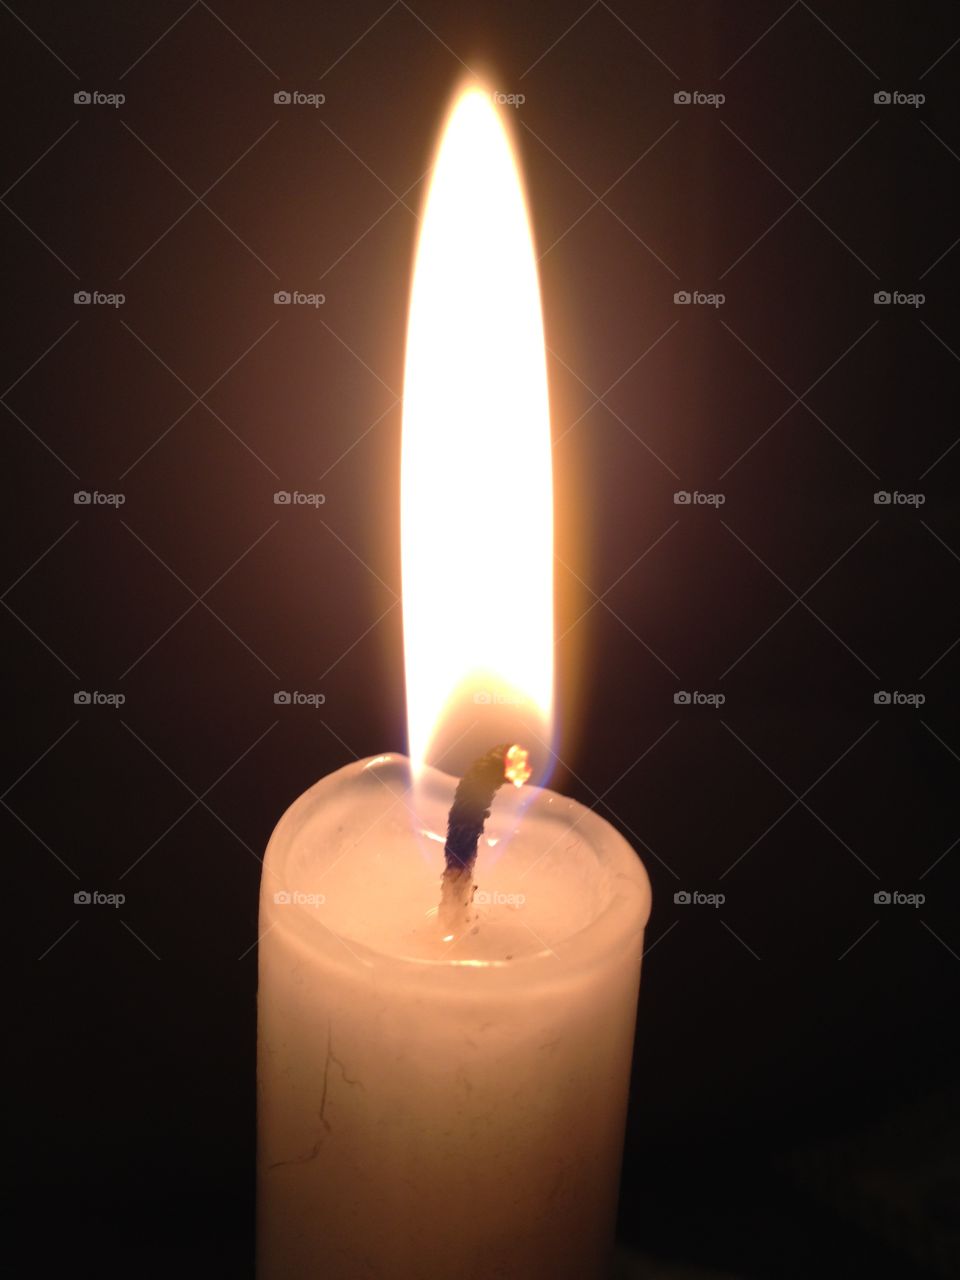 Flame. The flame of a single candle